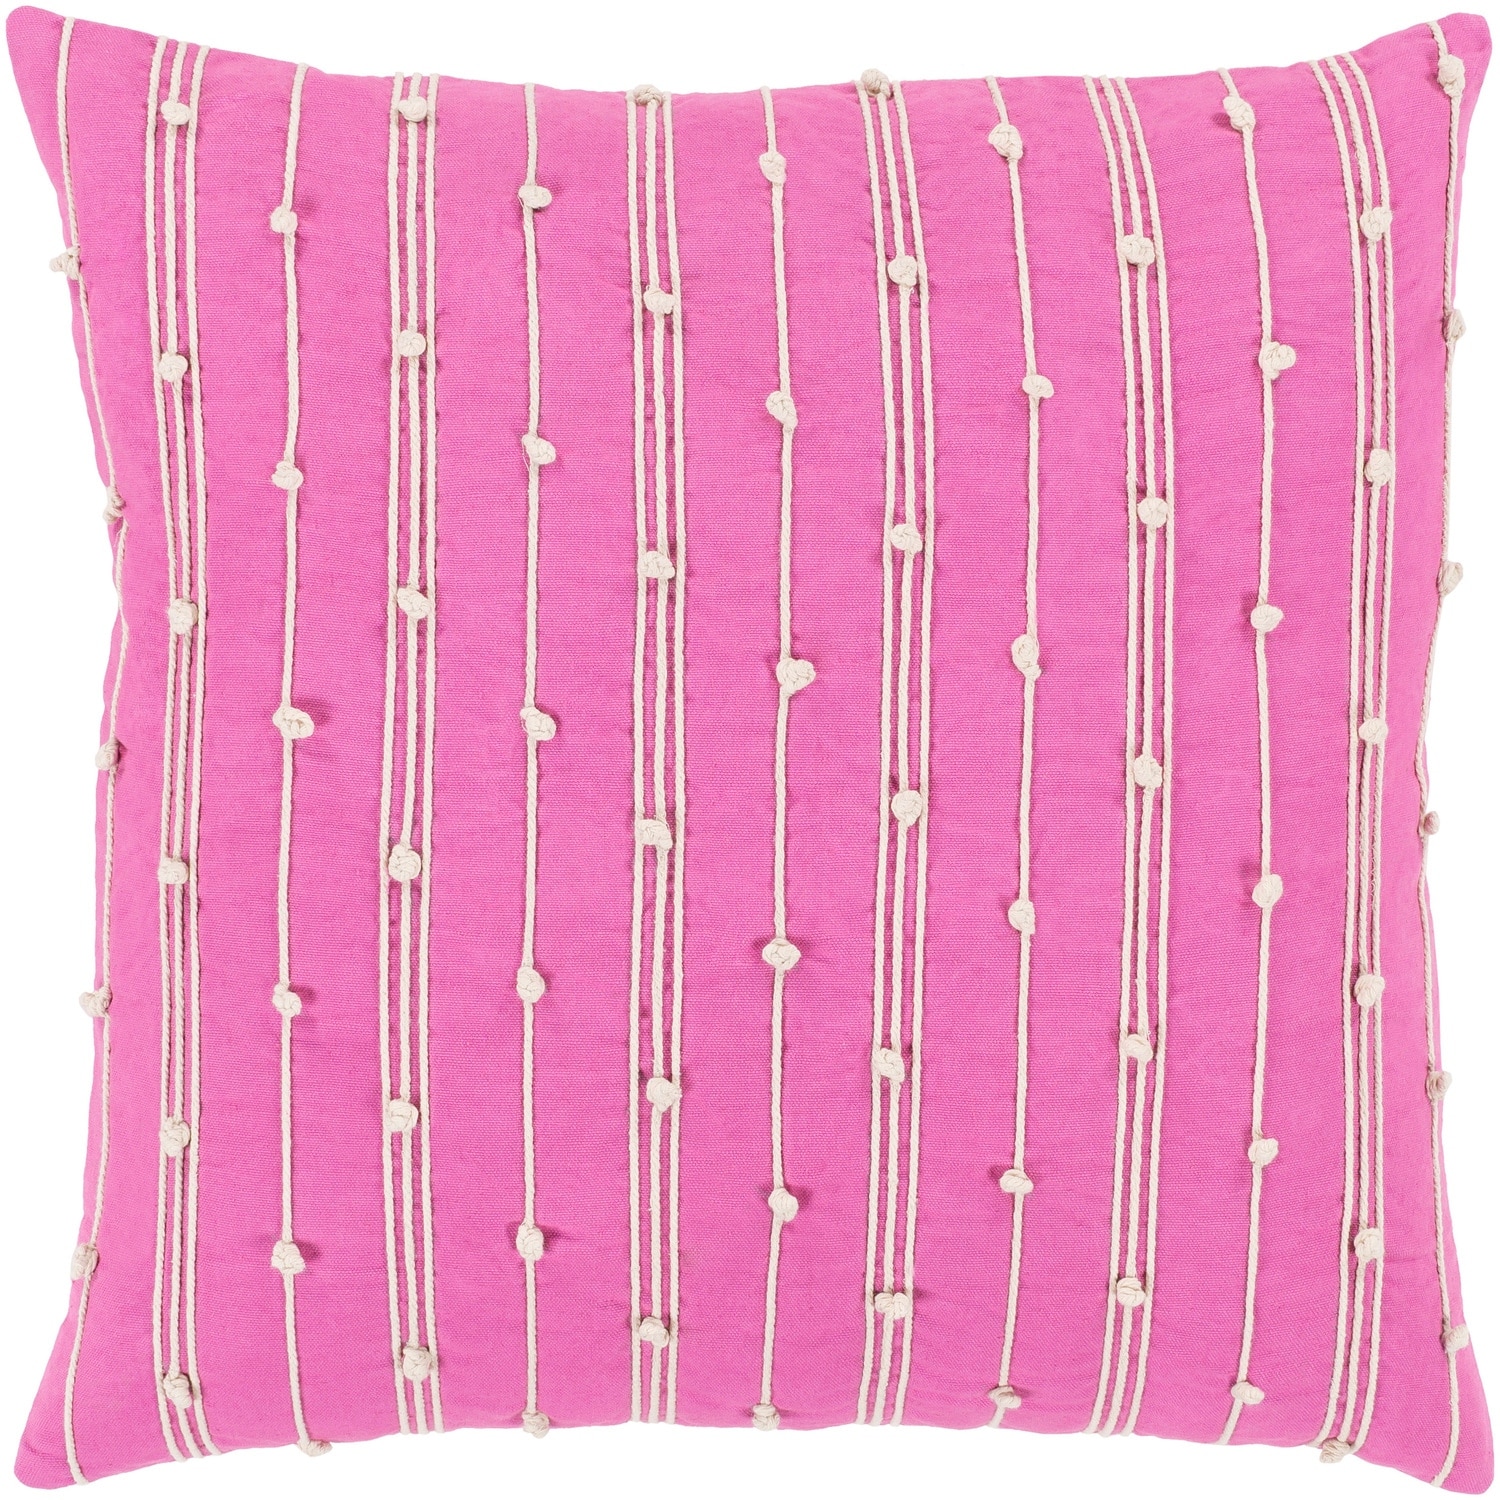 Raya Coastal Striped Bright Pink Feather Down or Poly Filled Throw Pillow 22-inch